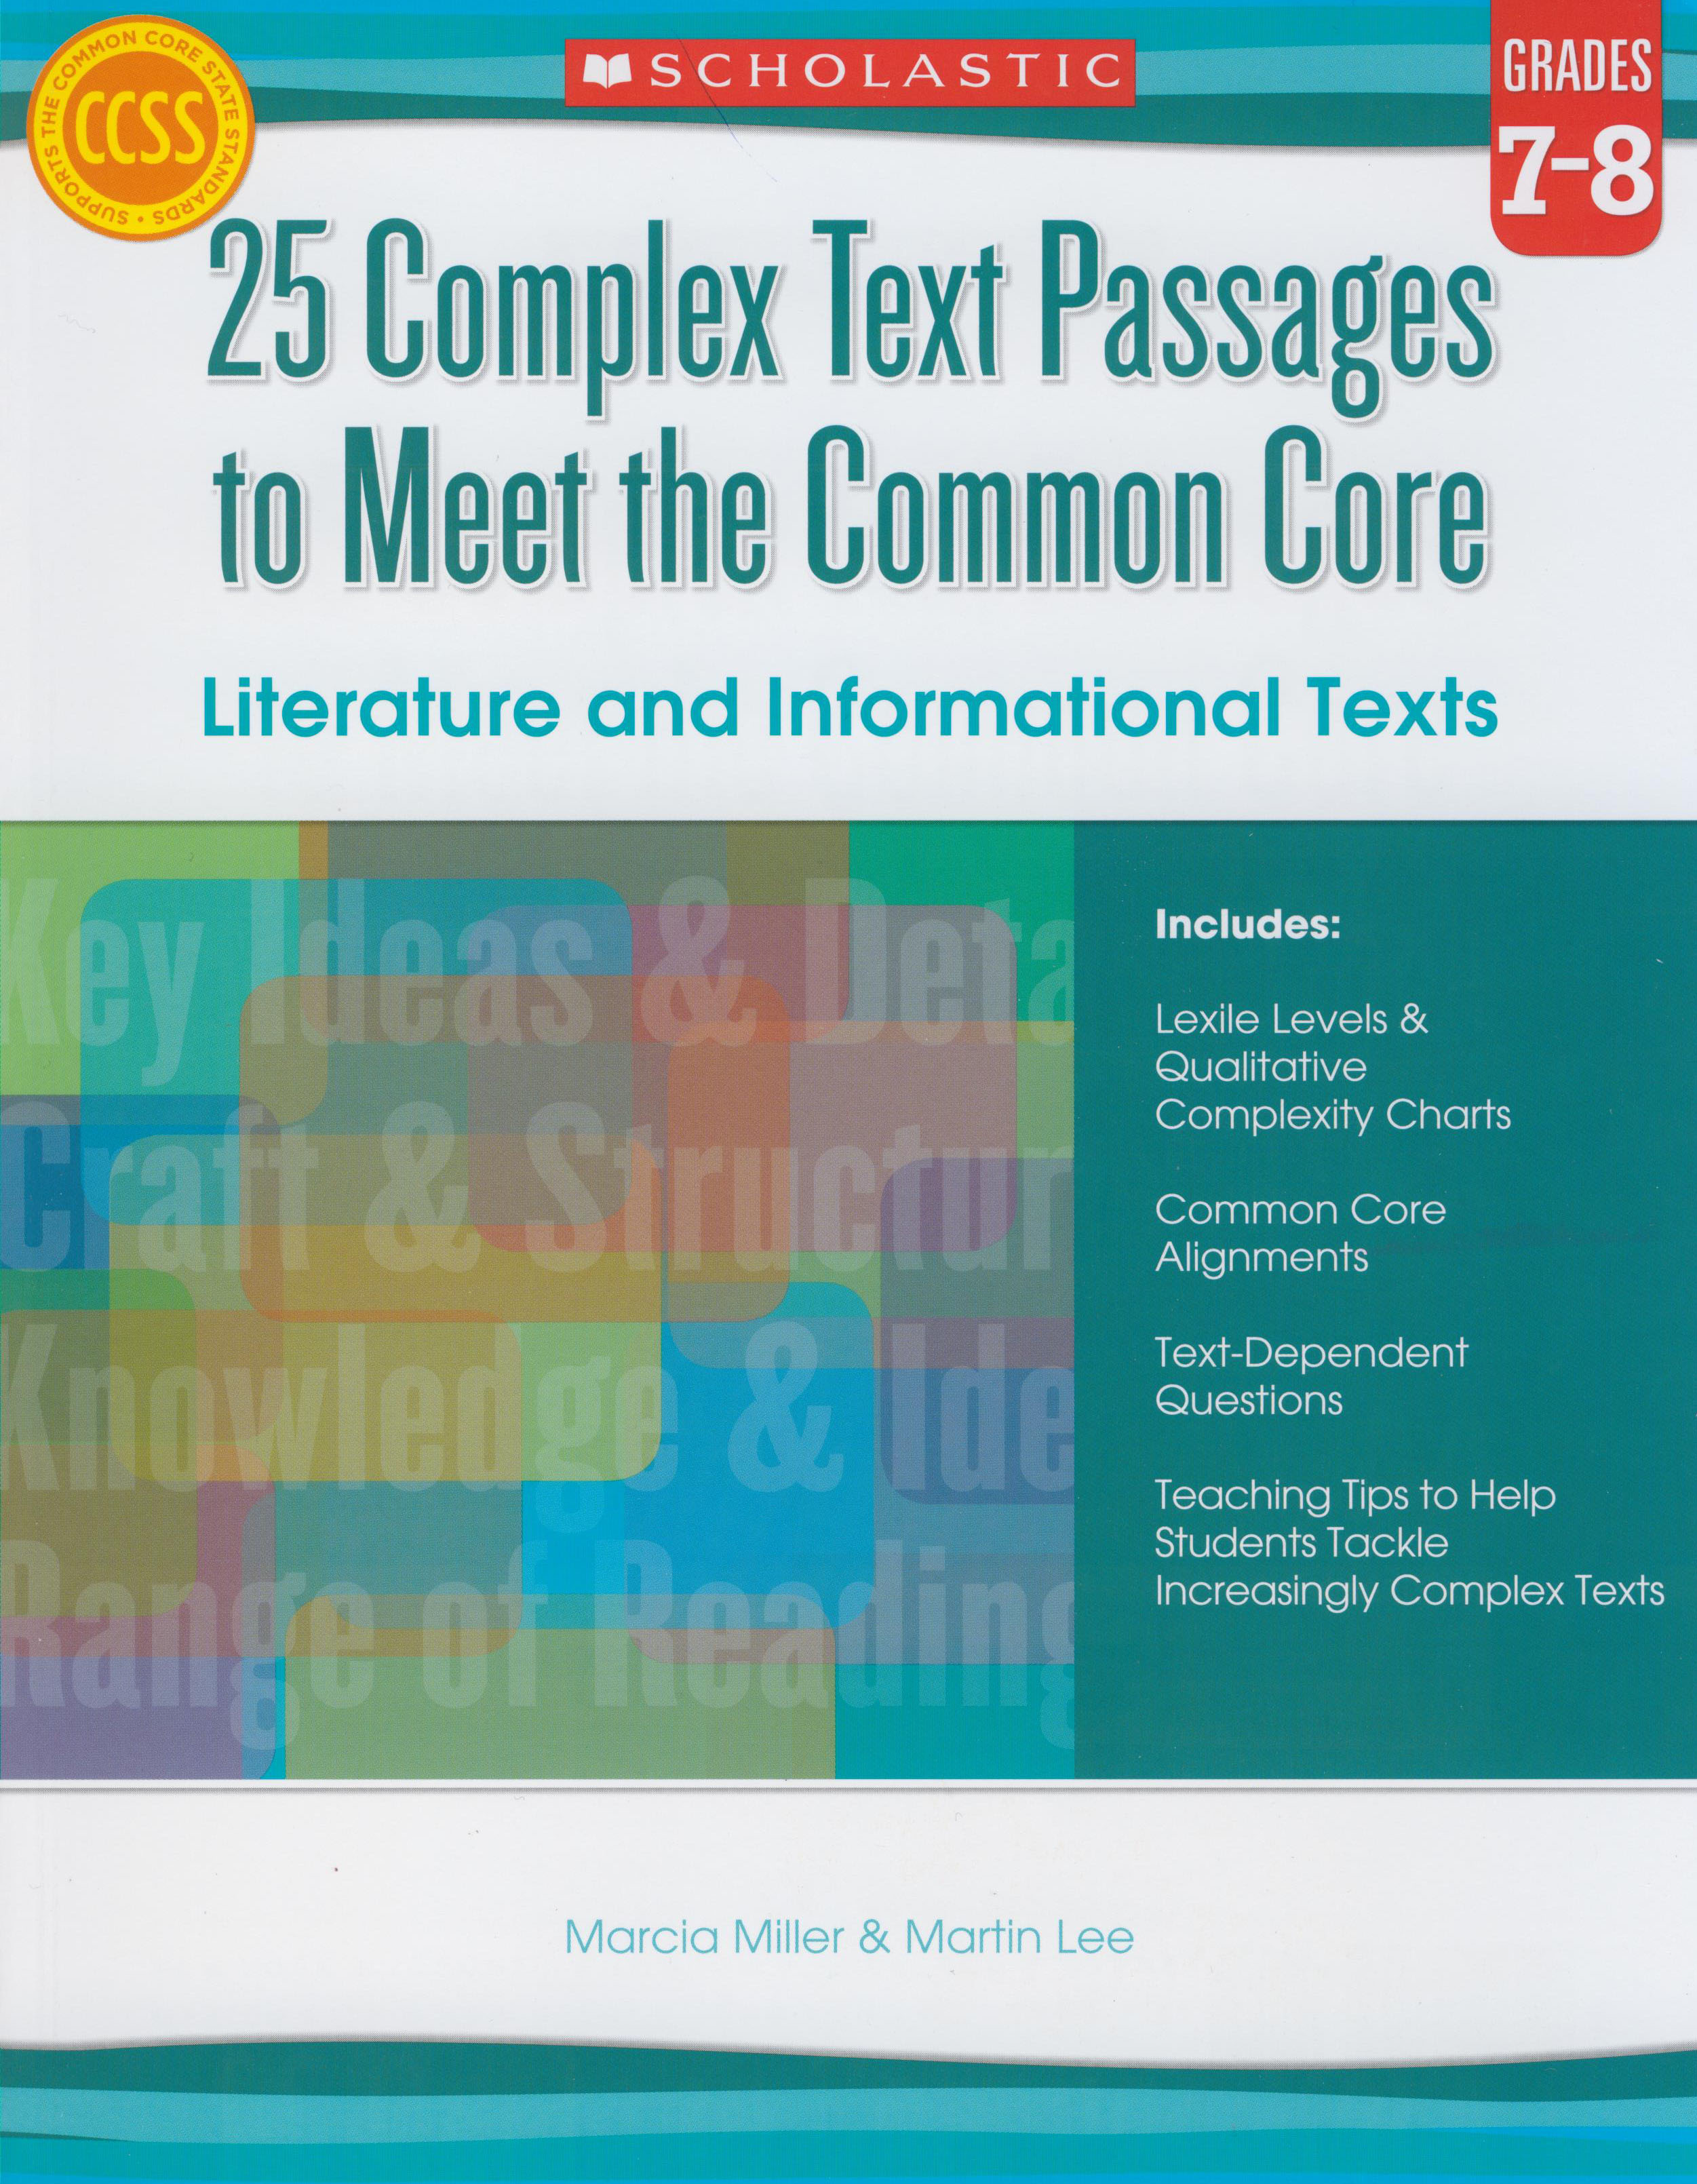 25 Complex Text Passages to Meet the Common Core Reproducible Book